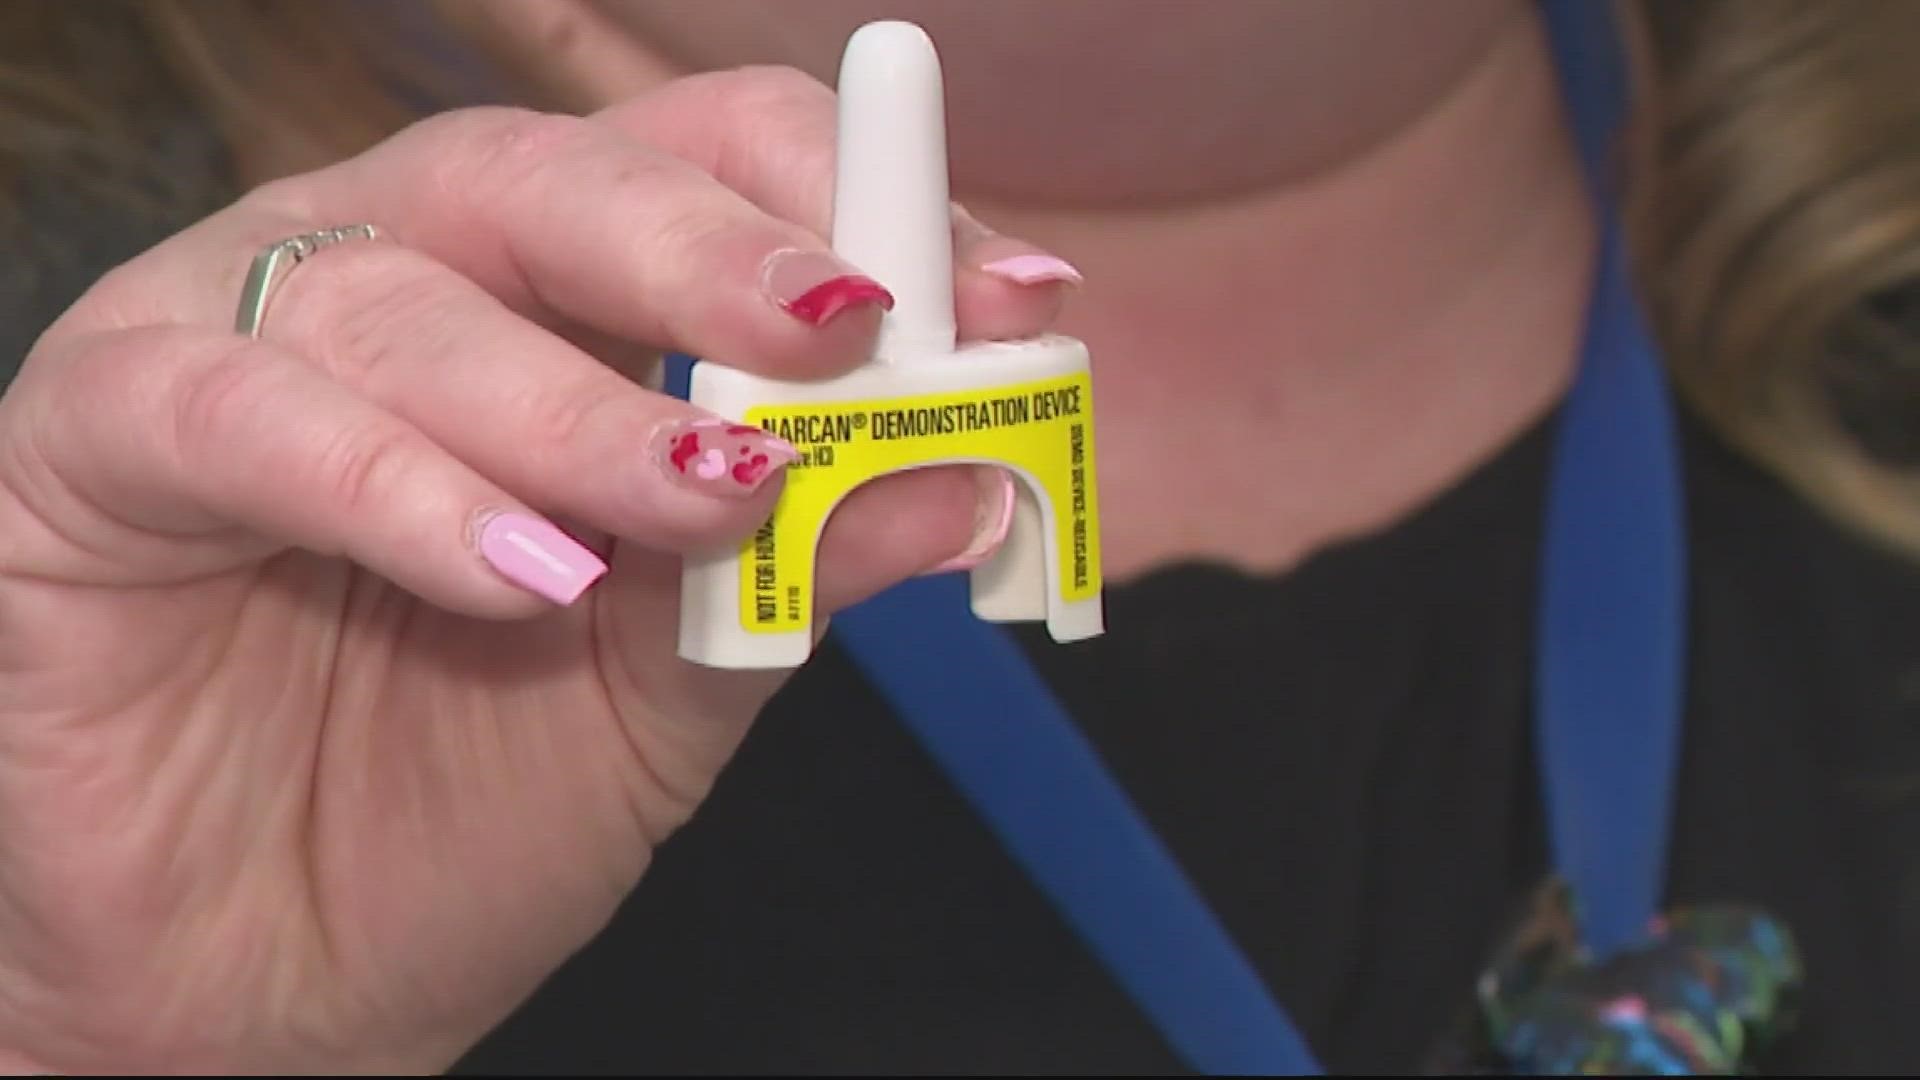 Naloxone is simple to use and could help save the life of someone who overdosed.